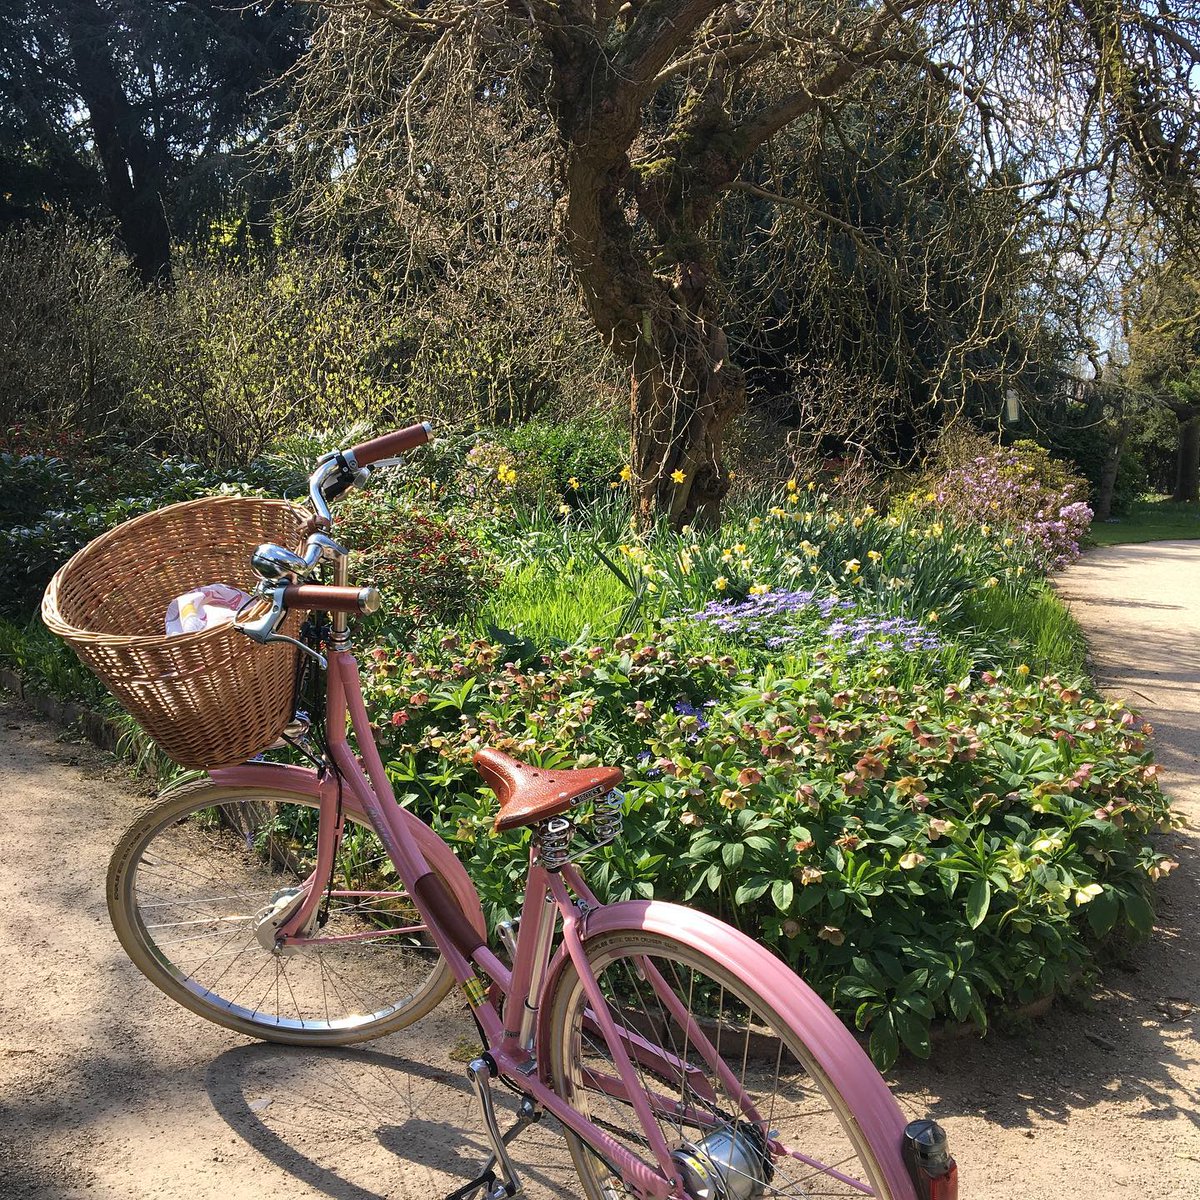 A blooming beautiful image well worth a re-share to celebrate the Spring Equinox here in the UK, from our friends at Blooms & Bicycles🌷 The road ahead brings longer days and sunnier skies! #Pashley #HelloSpring #Britishbicycles #Lovecycling #Adventureawaits